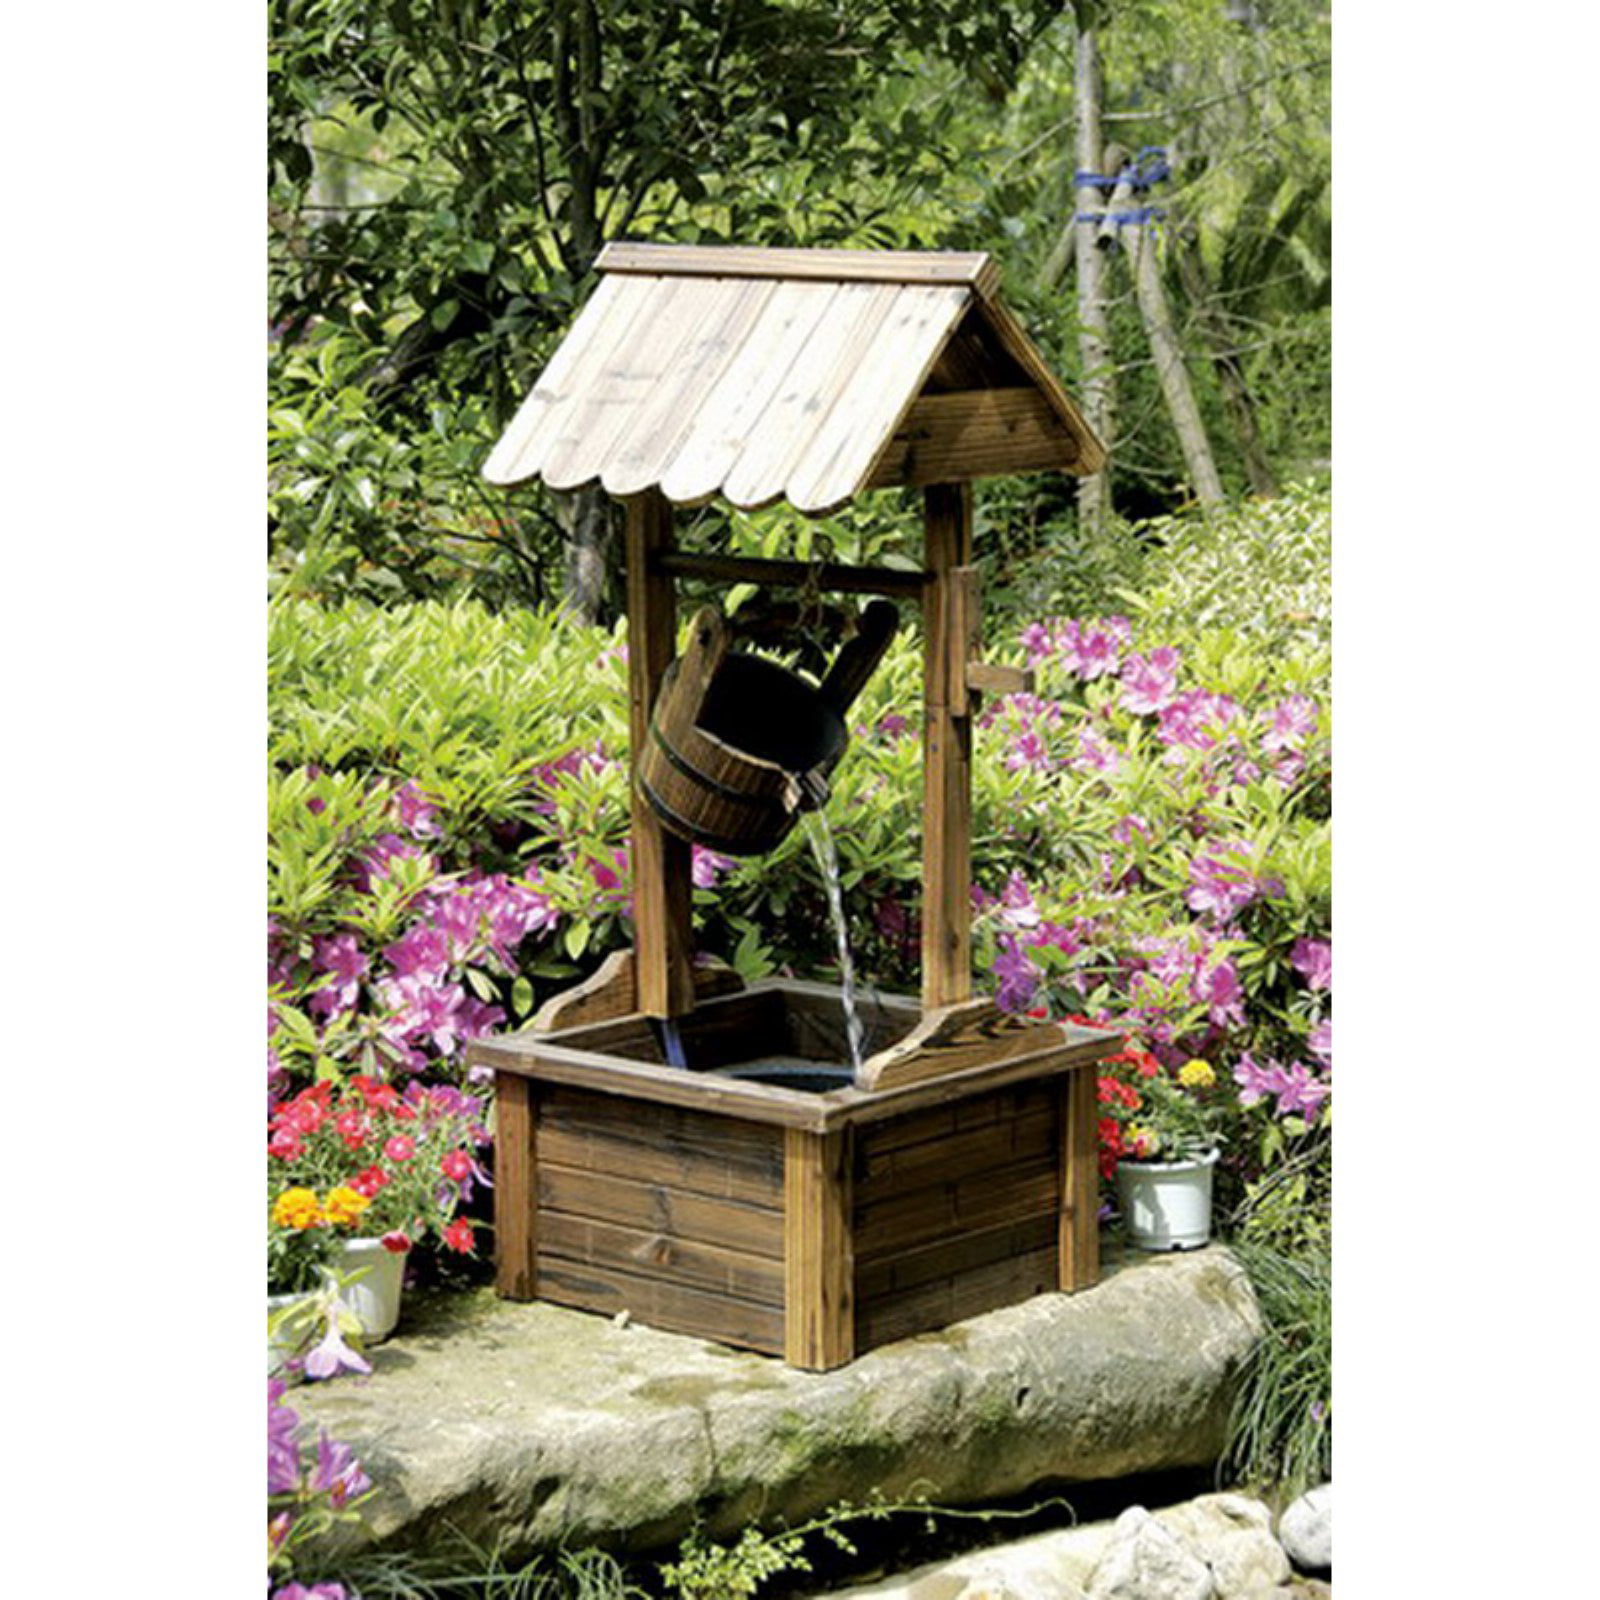 Wishing Well Water Feature Garden Ornament Large 69cm Tall NEW by Serenity